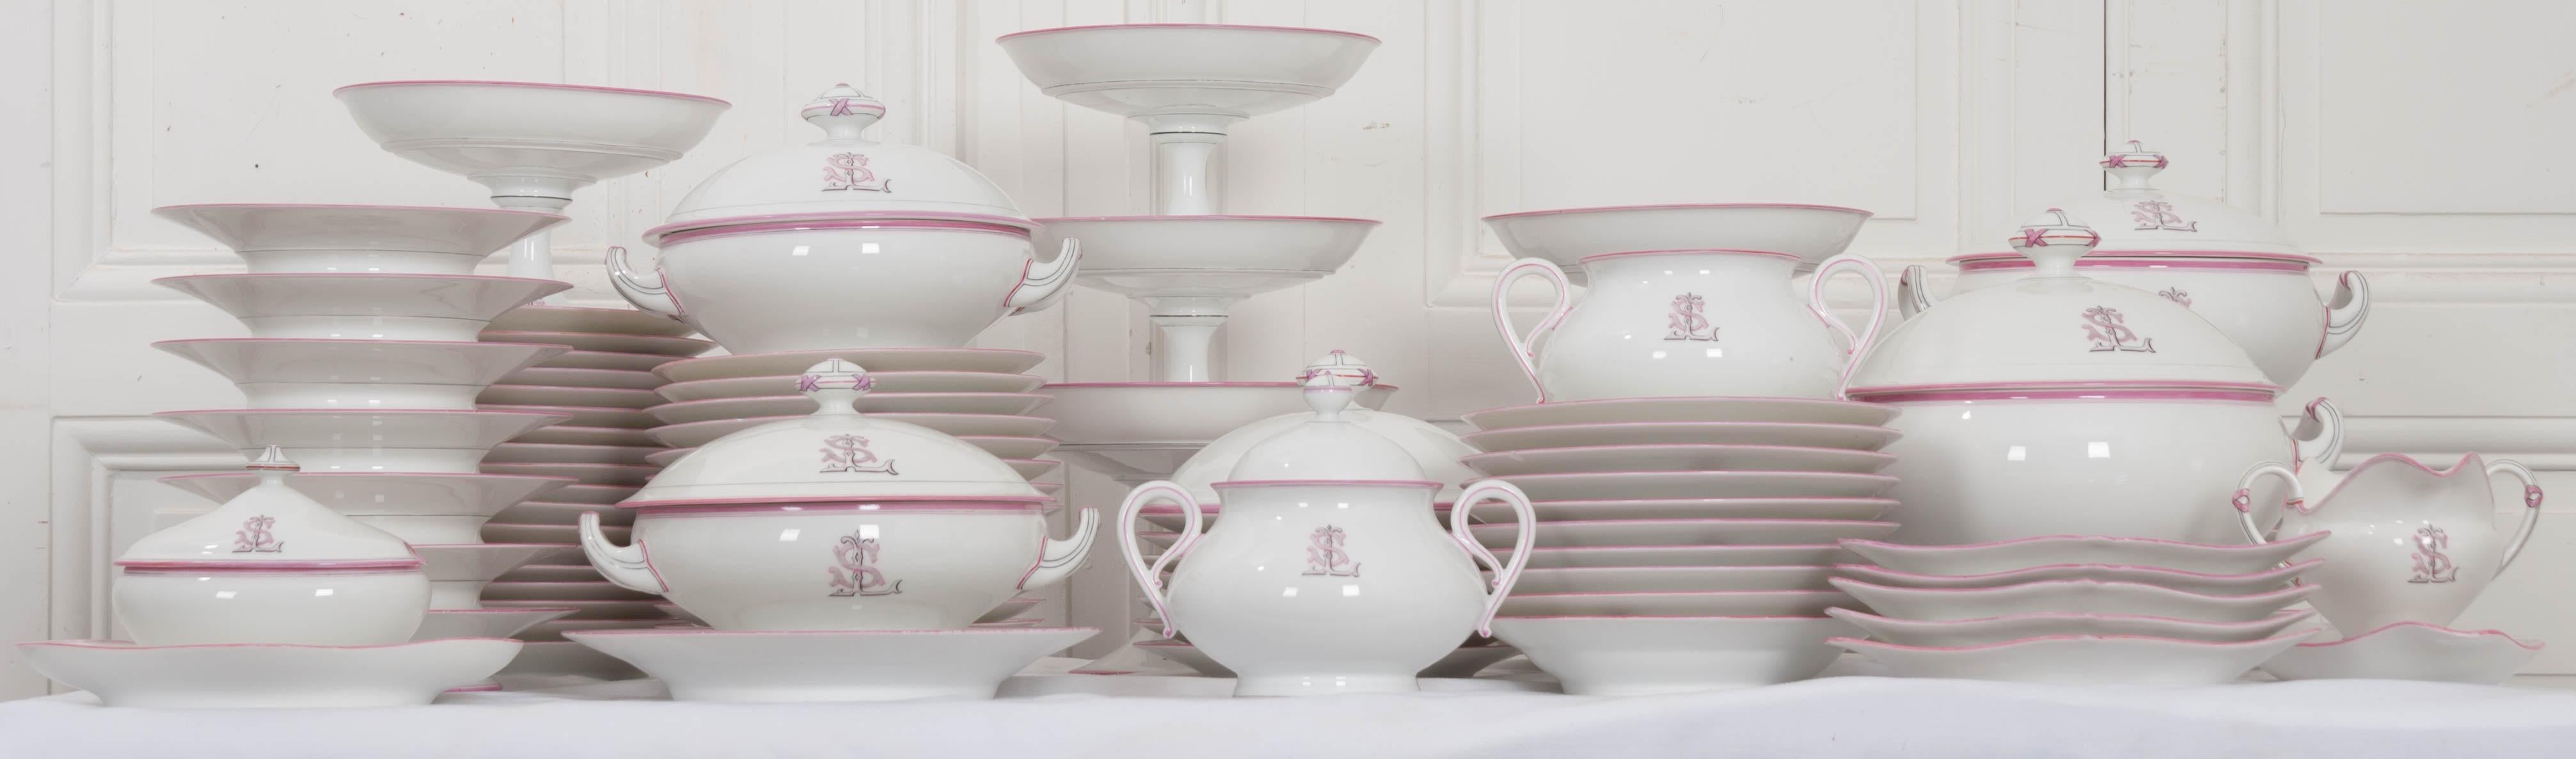 This lovely 19th century French Old Paris porcelain partial dinner service, circa 1860s, would complement most collections of Old Paris dinnerware beautifully. Each of the 95 pieces is banded in rose, a shade considered neutral in terms of Old Paris